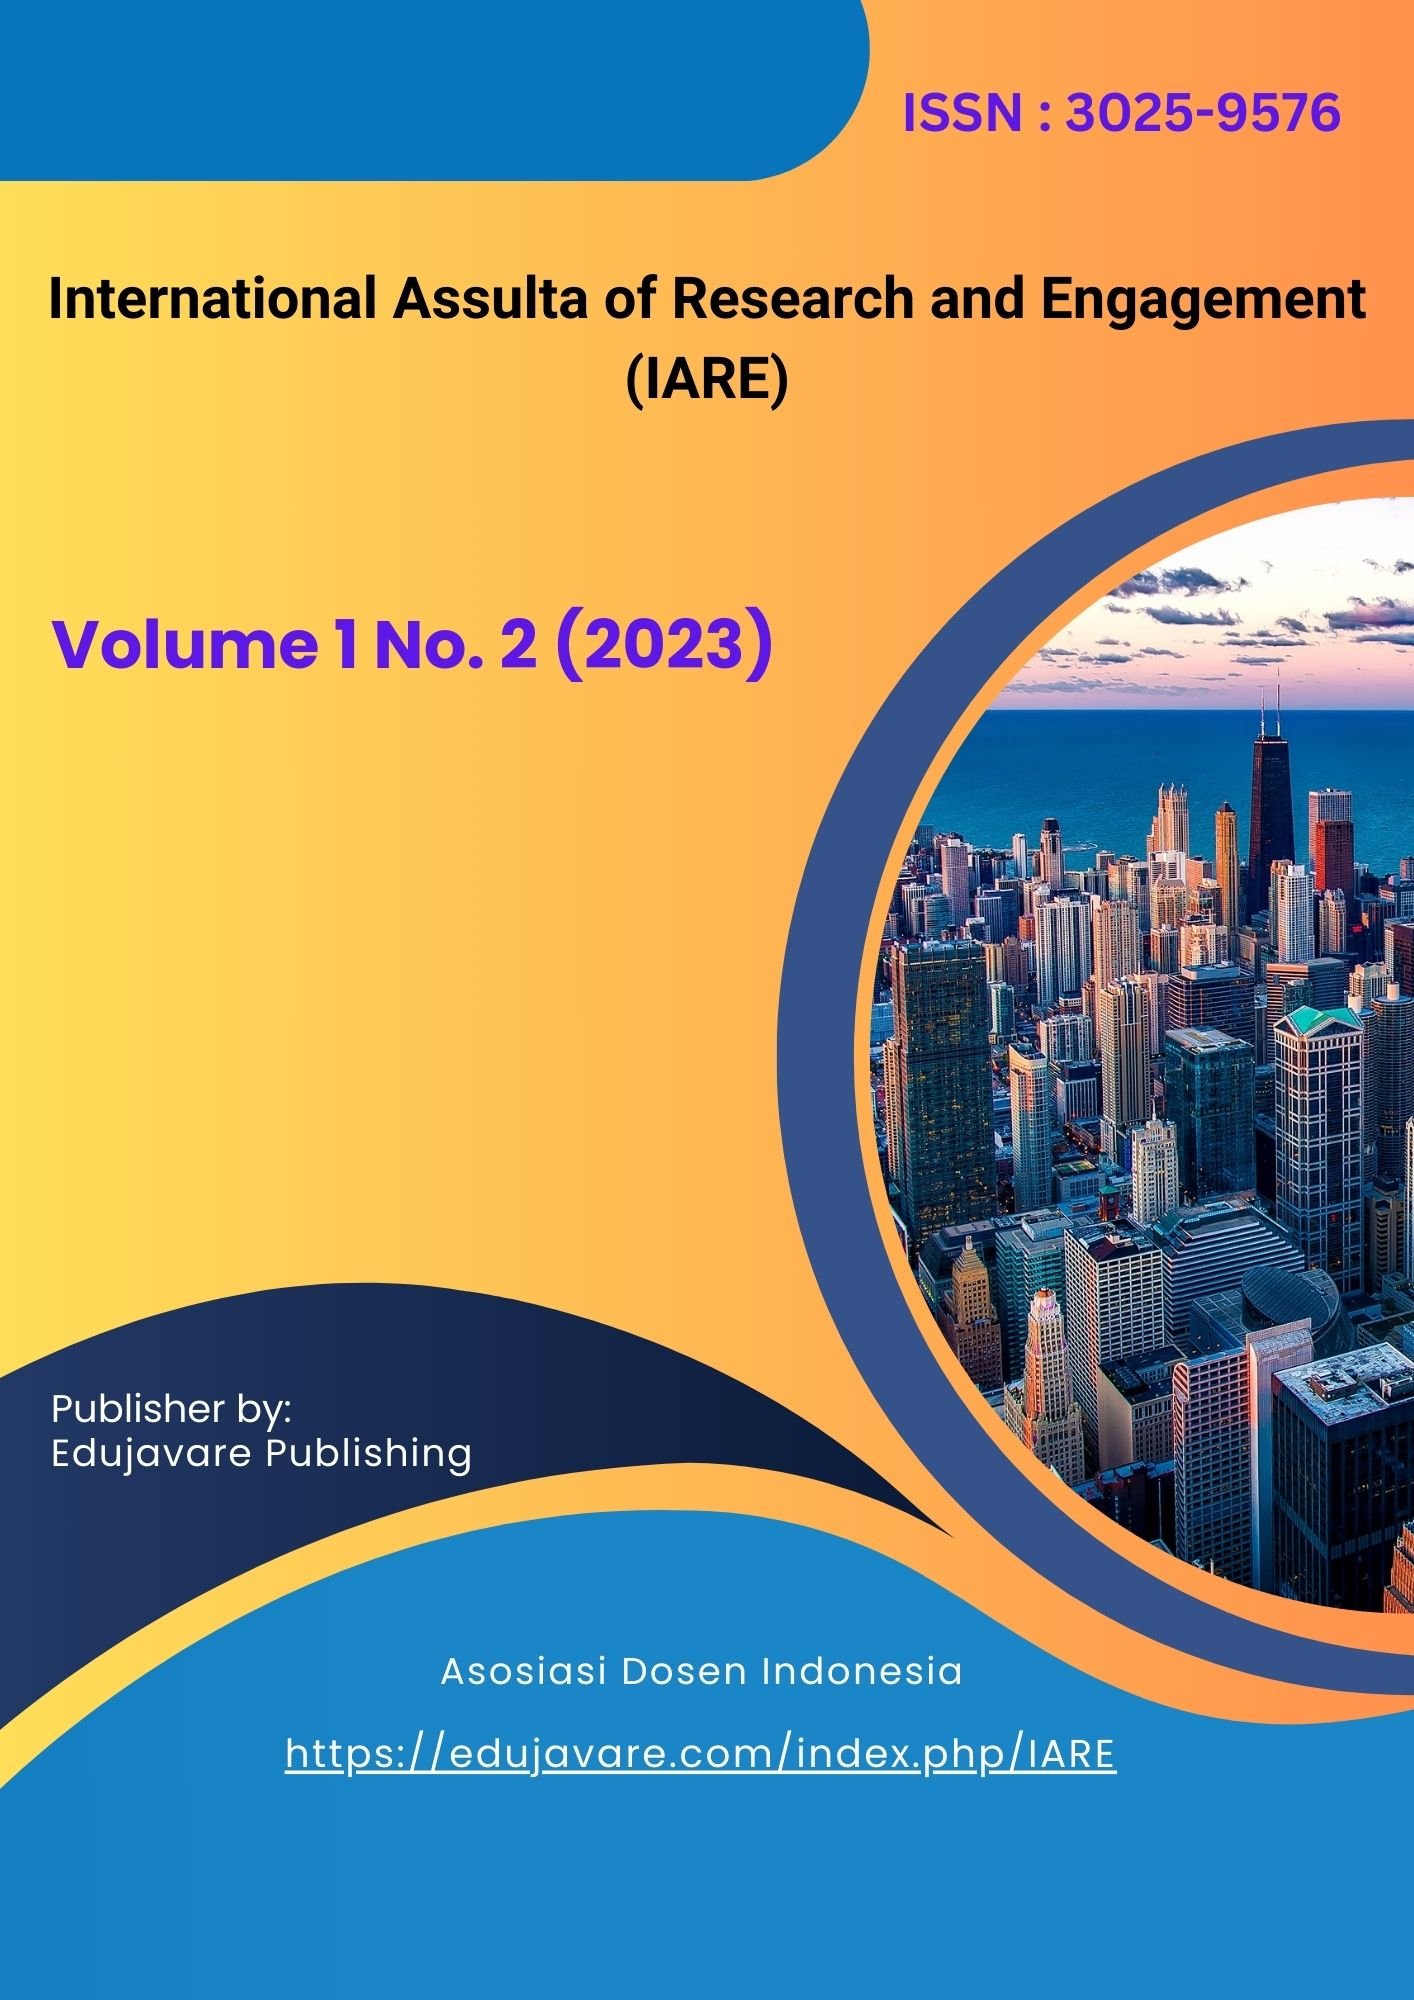 					View Vol. 1 No. 2 (2023): International Assulta of Research and Engagement (IARE)
				